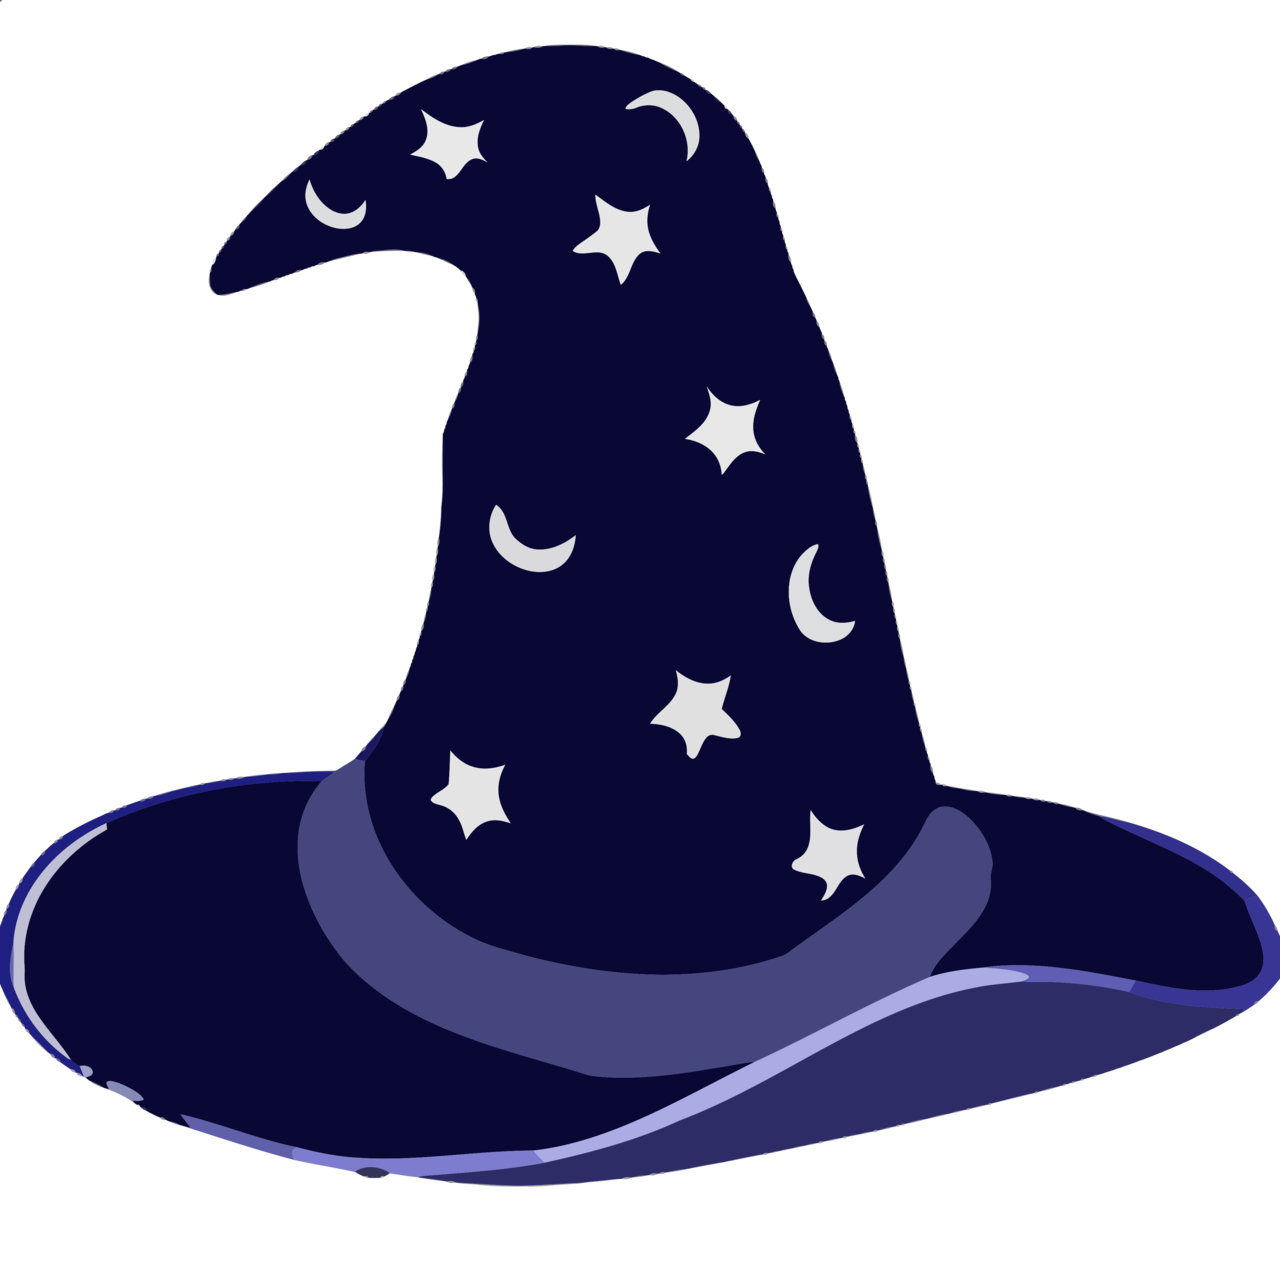 http://img4.wikia.nocookie.net/__cb20130803035658/stateoffantasy/images/7/74/Wizard_hat.png